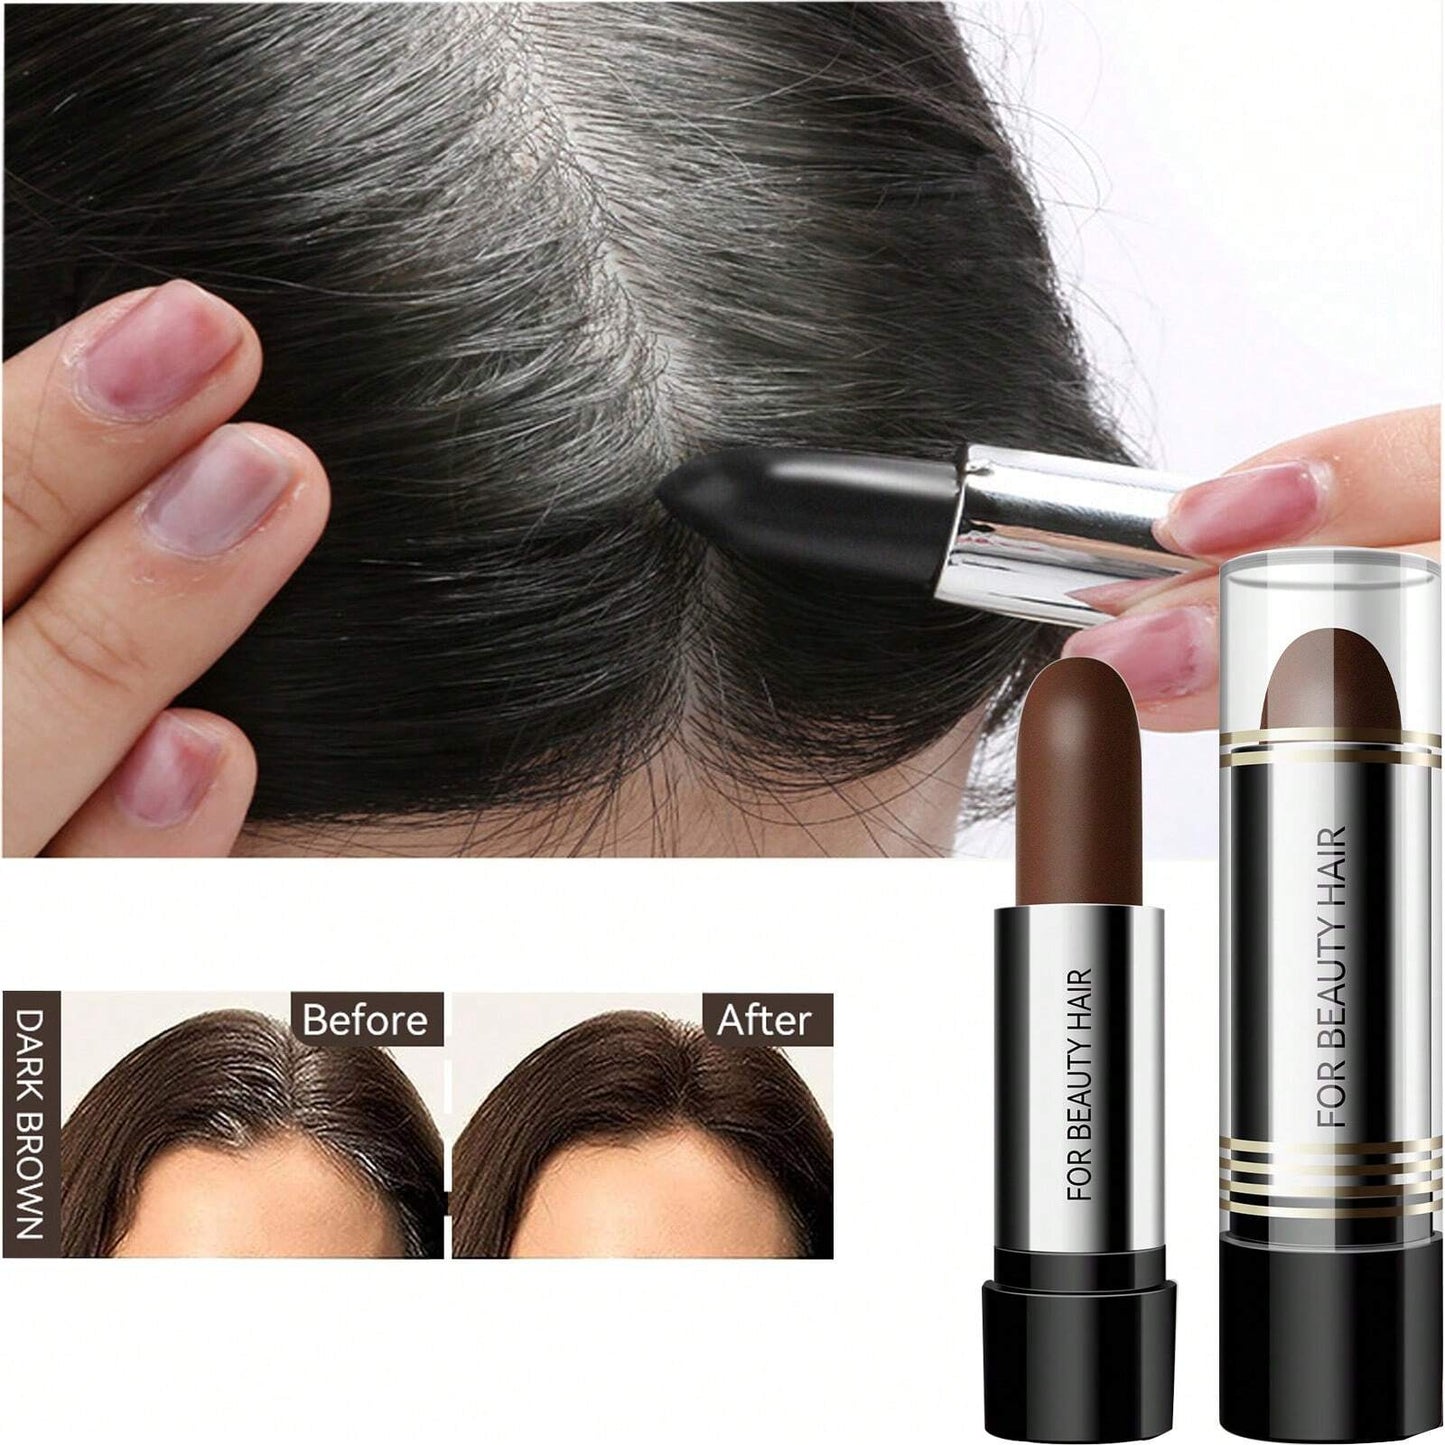 Disposable Hair Dye Pen - Temporary Hair Dye Stick, Hair Coloring Pen. Portable Hair Dyeing Tool designed to cover Gray Hair Roots. Small and Convenient, featuring Lipstick Style Hair Dye Stick (4g/0.14oz).